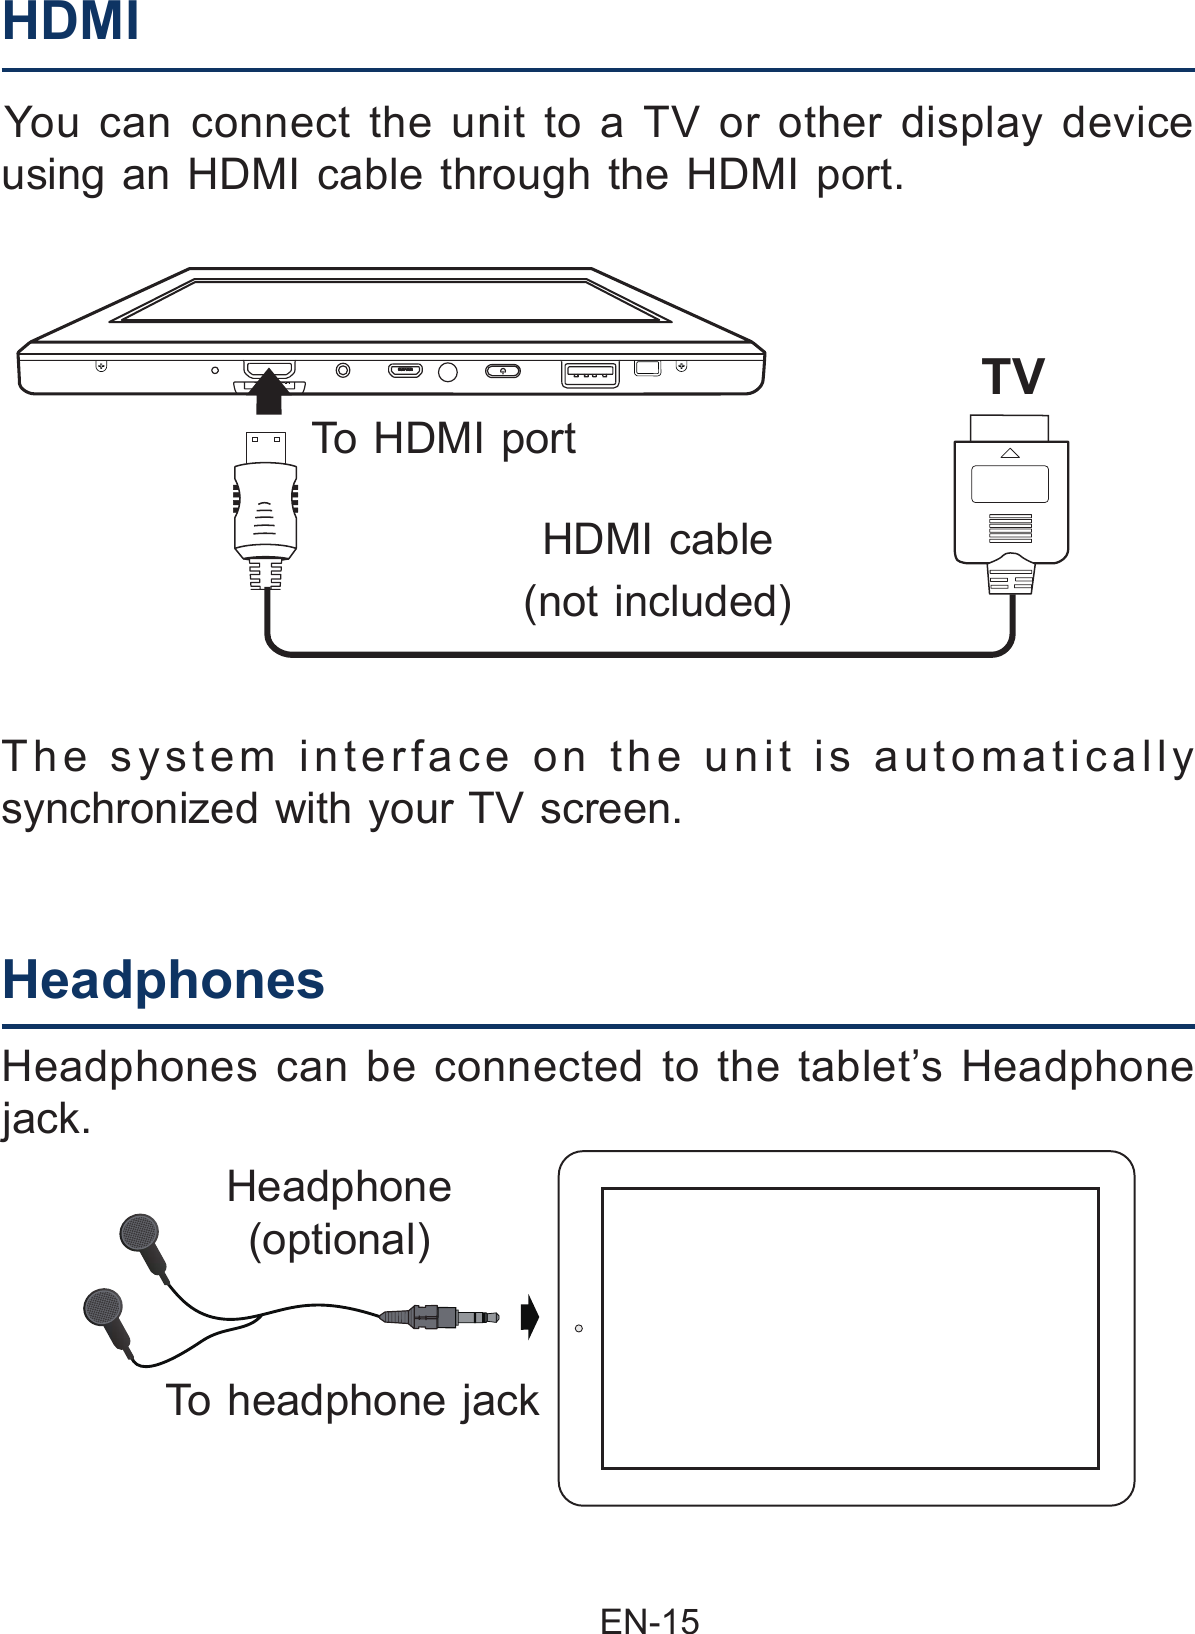                                                EN-15 You can connect the unit to a TV or other display device using an HDMI cable through the HDMI port. The system interface on the unit is automatically synchronized with your TV screen.HDMI  Headphones  Headphones can be connected to the tablet’s Headphone jack.TVTo HDMI portHDMI cable(not included) To headphone jack Headphone(optional)